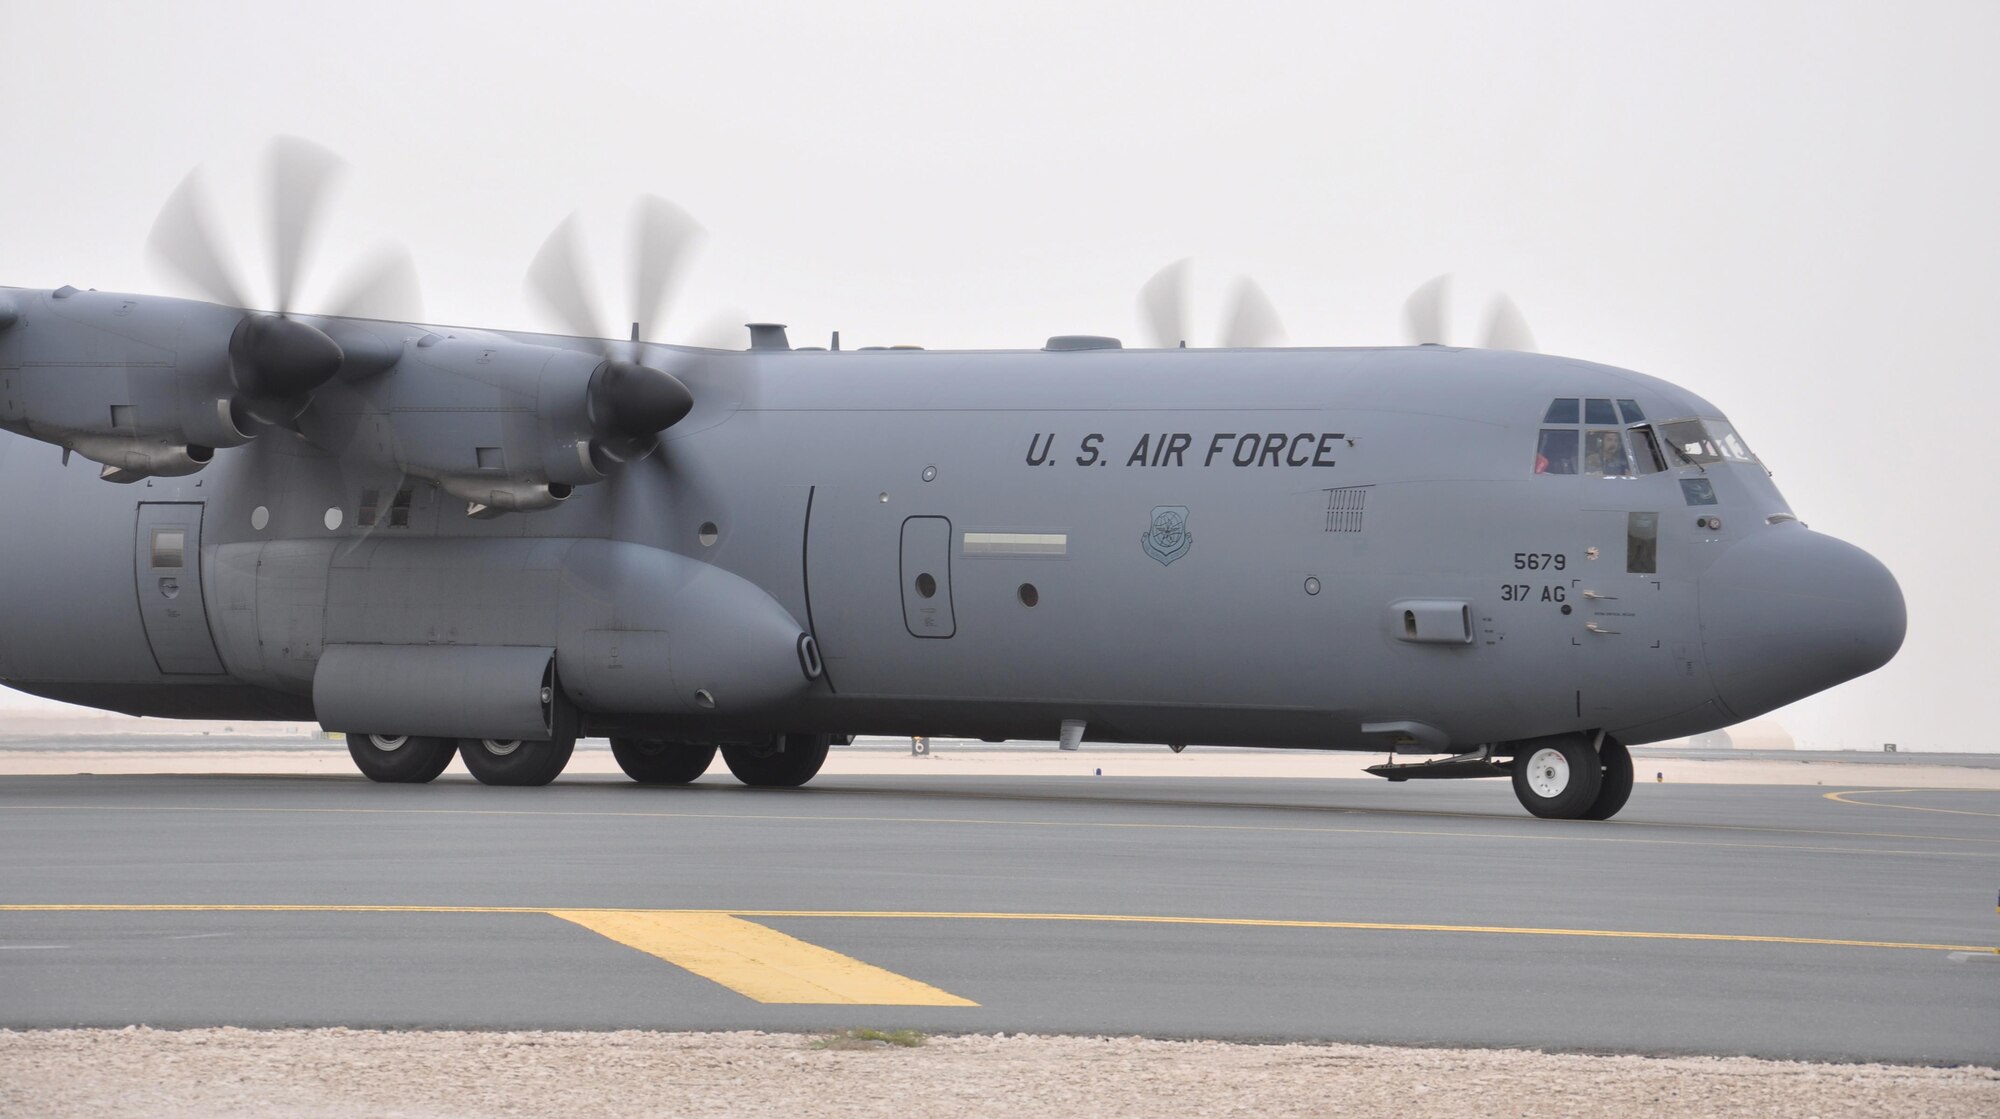 A C-130 from Dyess Air Force Base, Texas taxis to its parking spot after landing at Al Udeid Air Base, Qatar March 17. Ensuring aircraft can land safely is one of the many responsibilities of the 379th Expeditionary Operations Support Squadron’s Airfield Management team. The team inspects AUAB’s airfield every day, more than 49 million square feet of pavement. Any discrepancies that could interfere with flying operations are reported and dealt with quickly. In 2015, the team supported more than 20,000 sorties. (U.S. Air Force photo by Tech. Sgt. James Hodgman/Released)